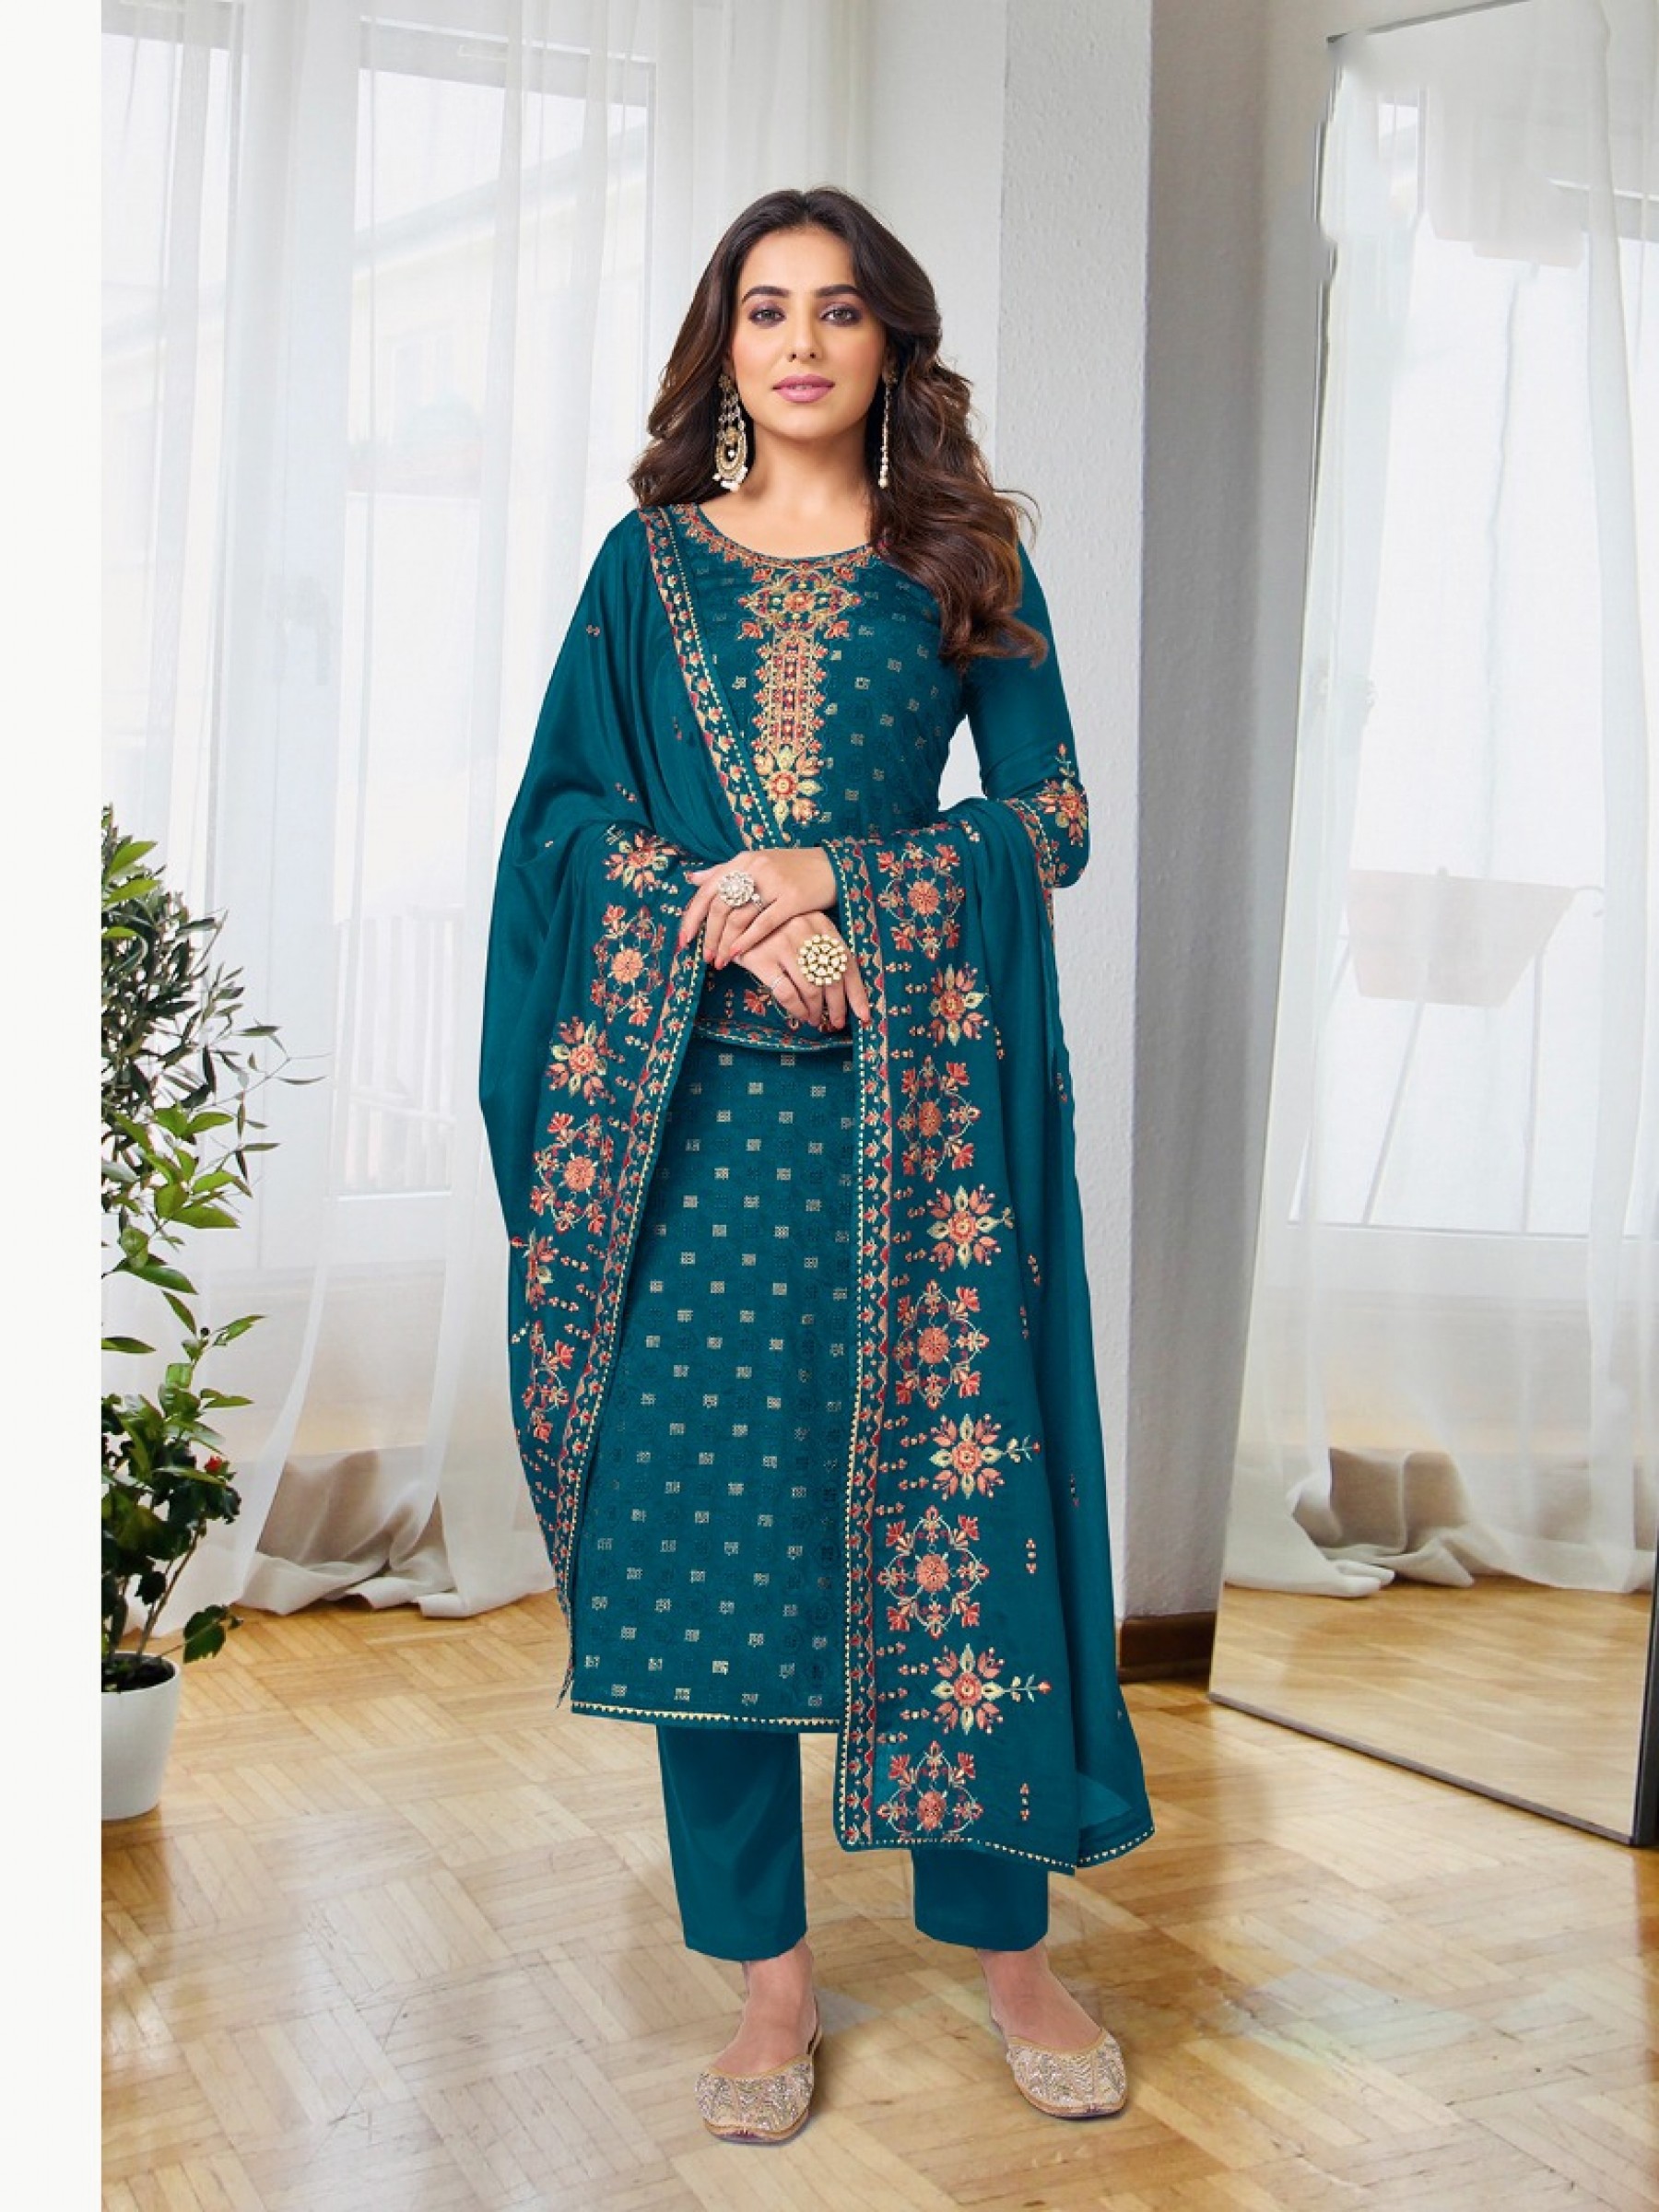 Chinon  Fabrics Party Wear Suit In Teal Blue Color With Embroidery Work